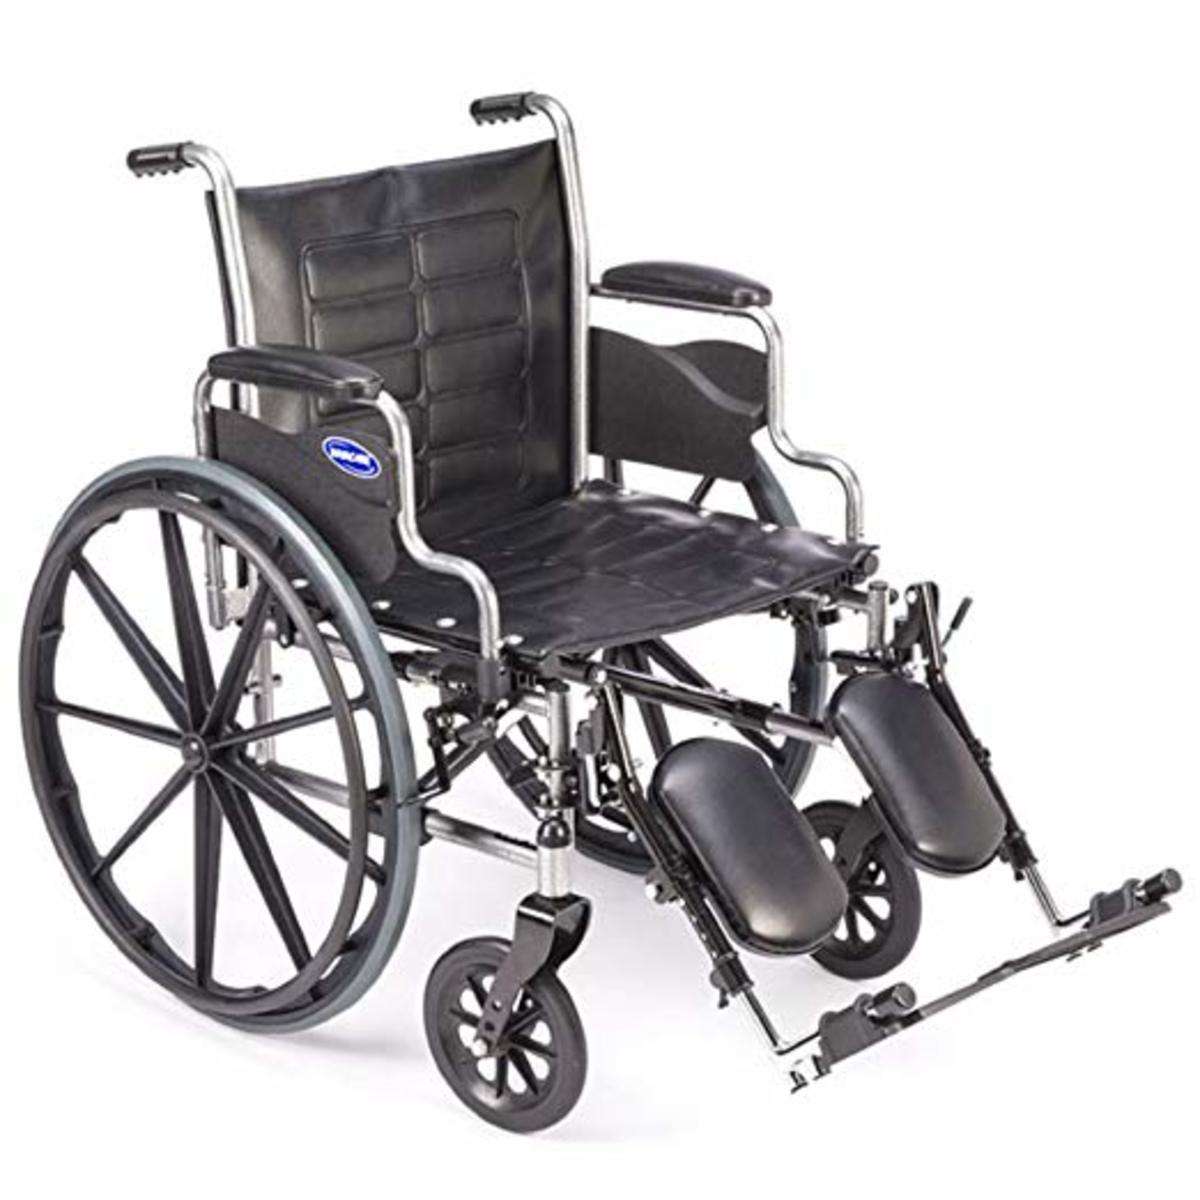 Invacare Swing-Away Elevating Legrests, Aluminum Footplates, and Padded Calf Pads